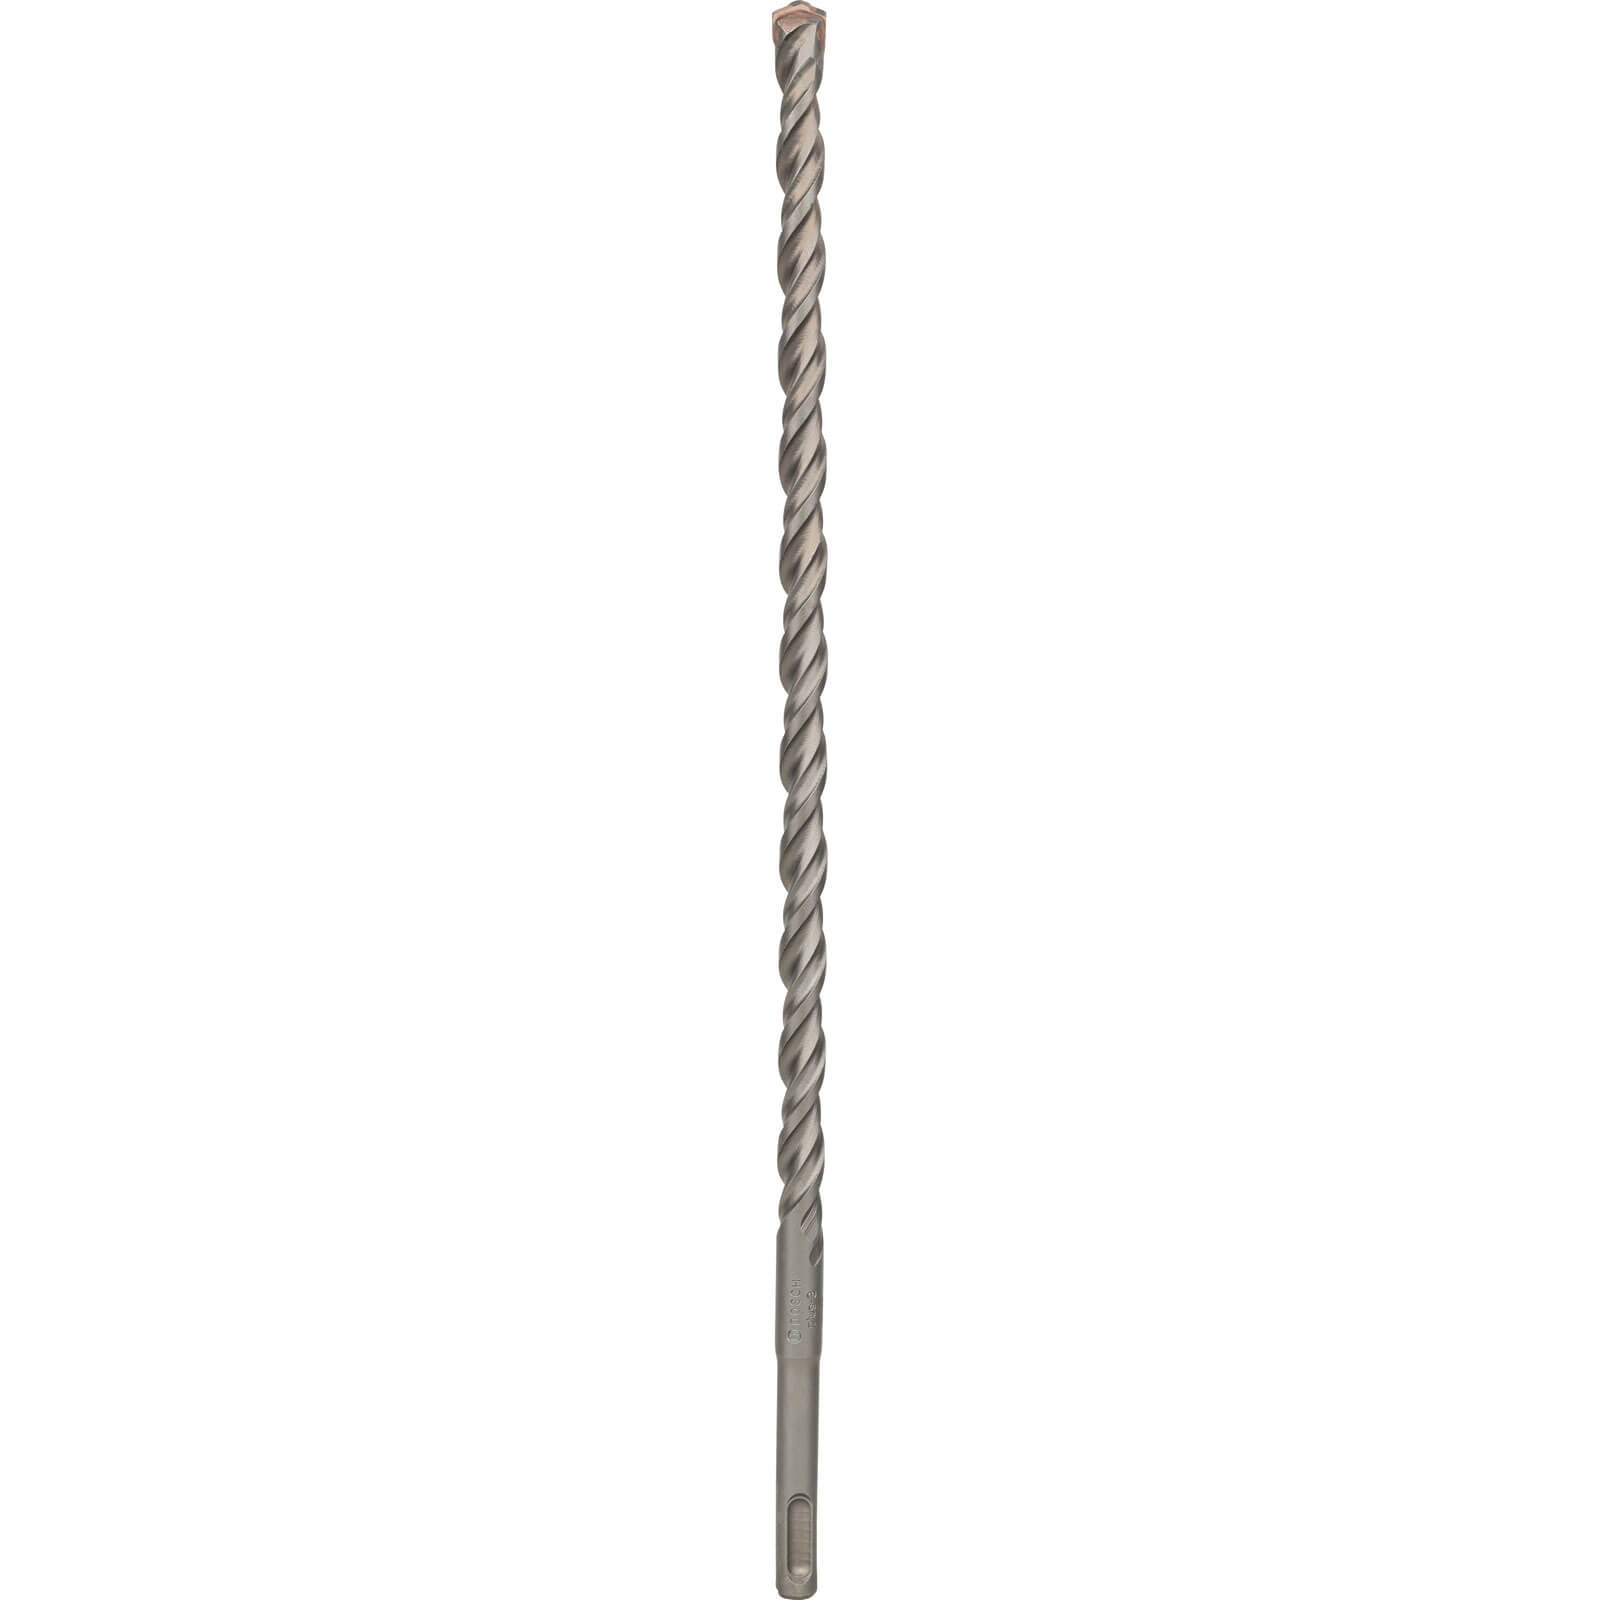 Image of Bosch Series 3 SDS Plus Masonry Drill Bit 12mm 360mm Pack of 1